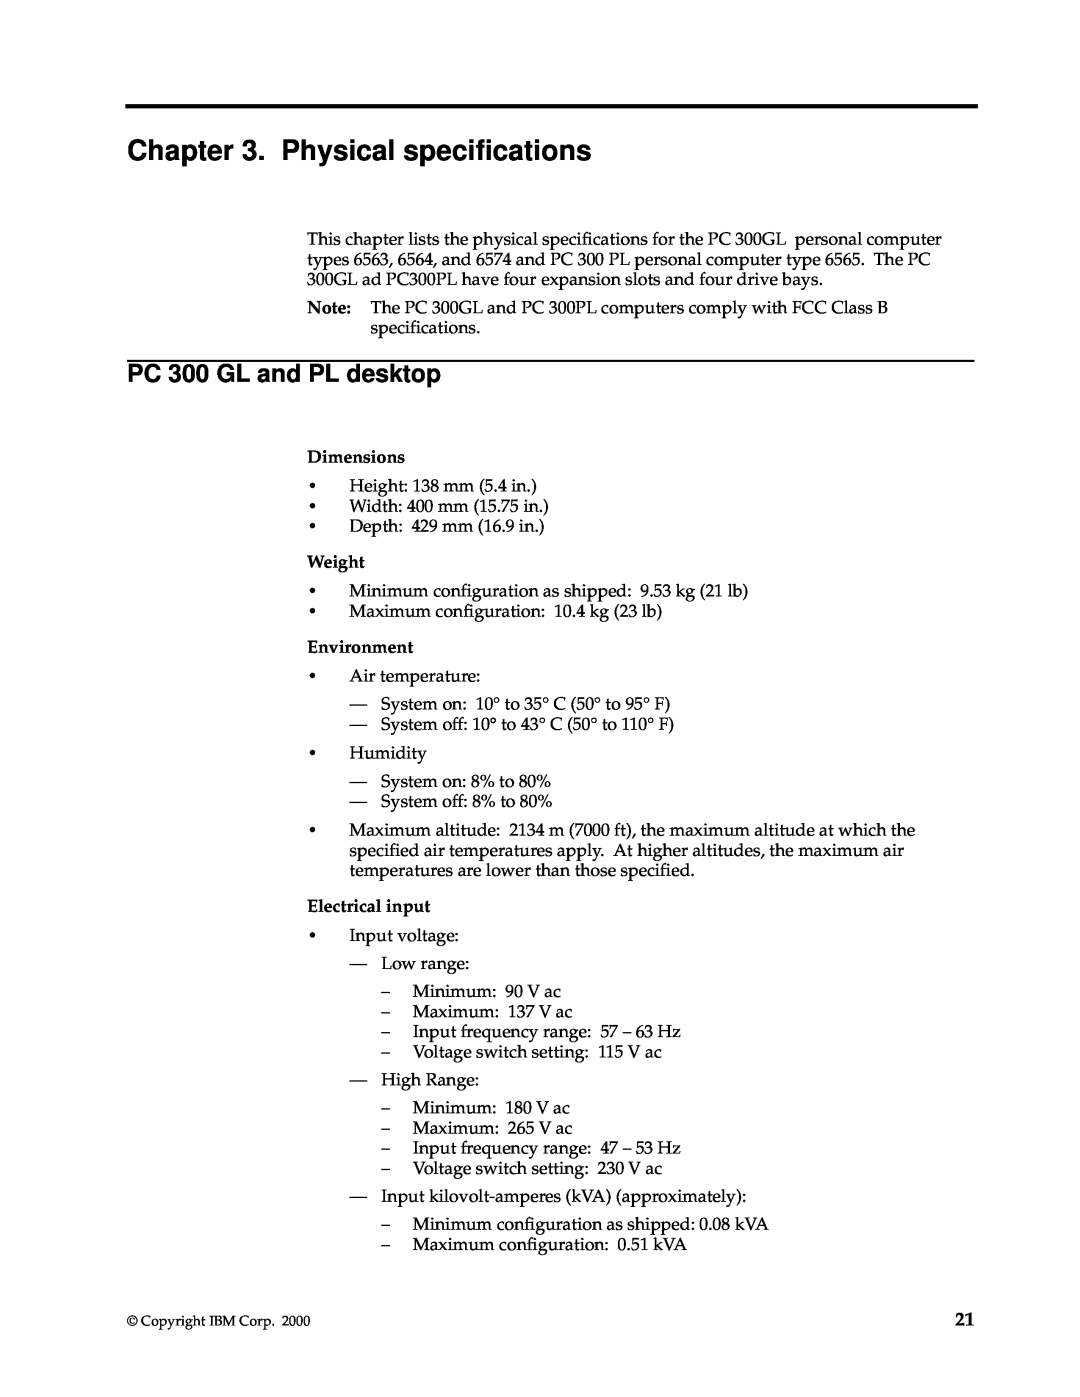 IBM PC 300GL manual Physical specifications, PC 300 GL and PL desktop 